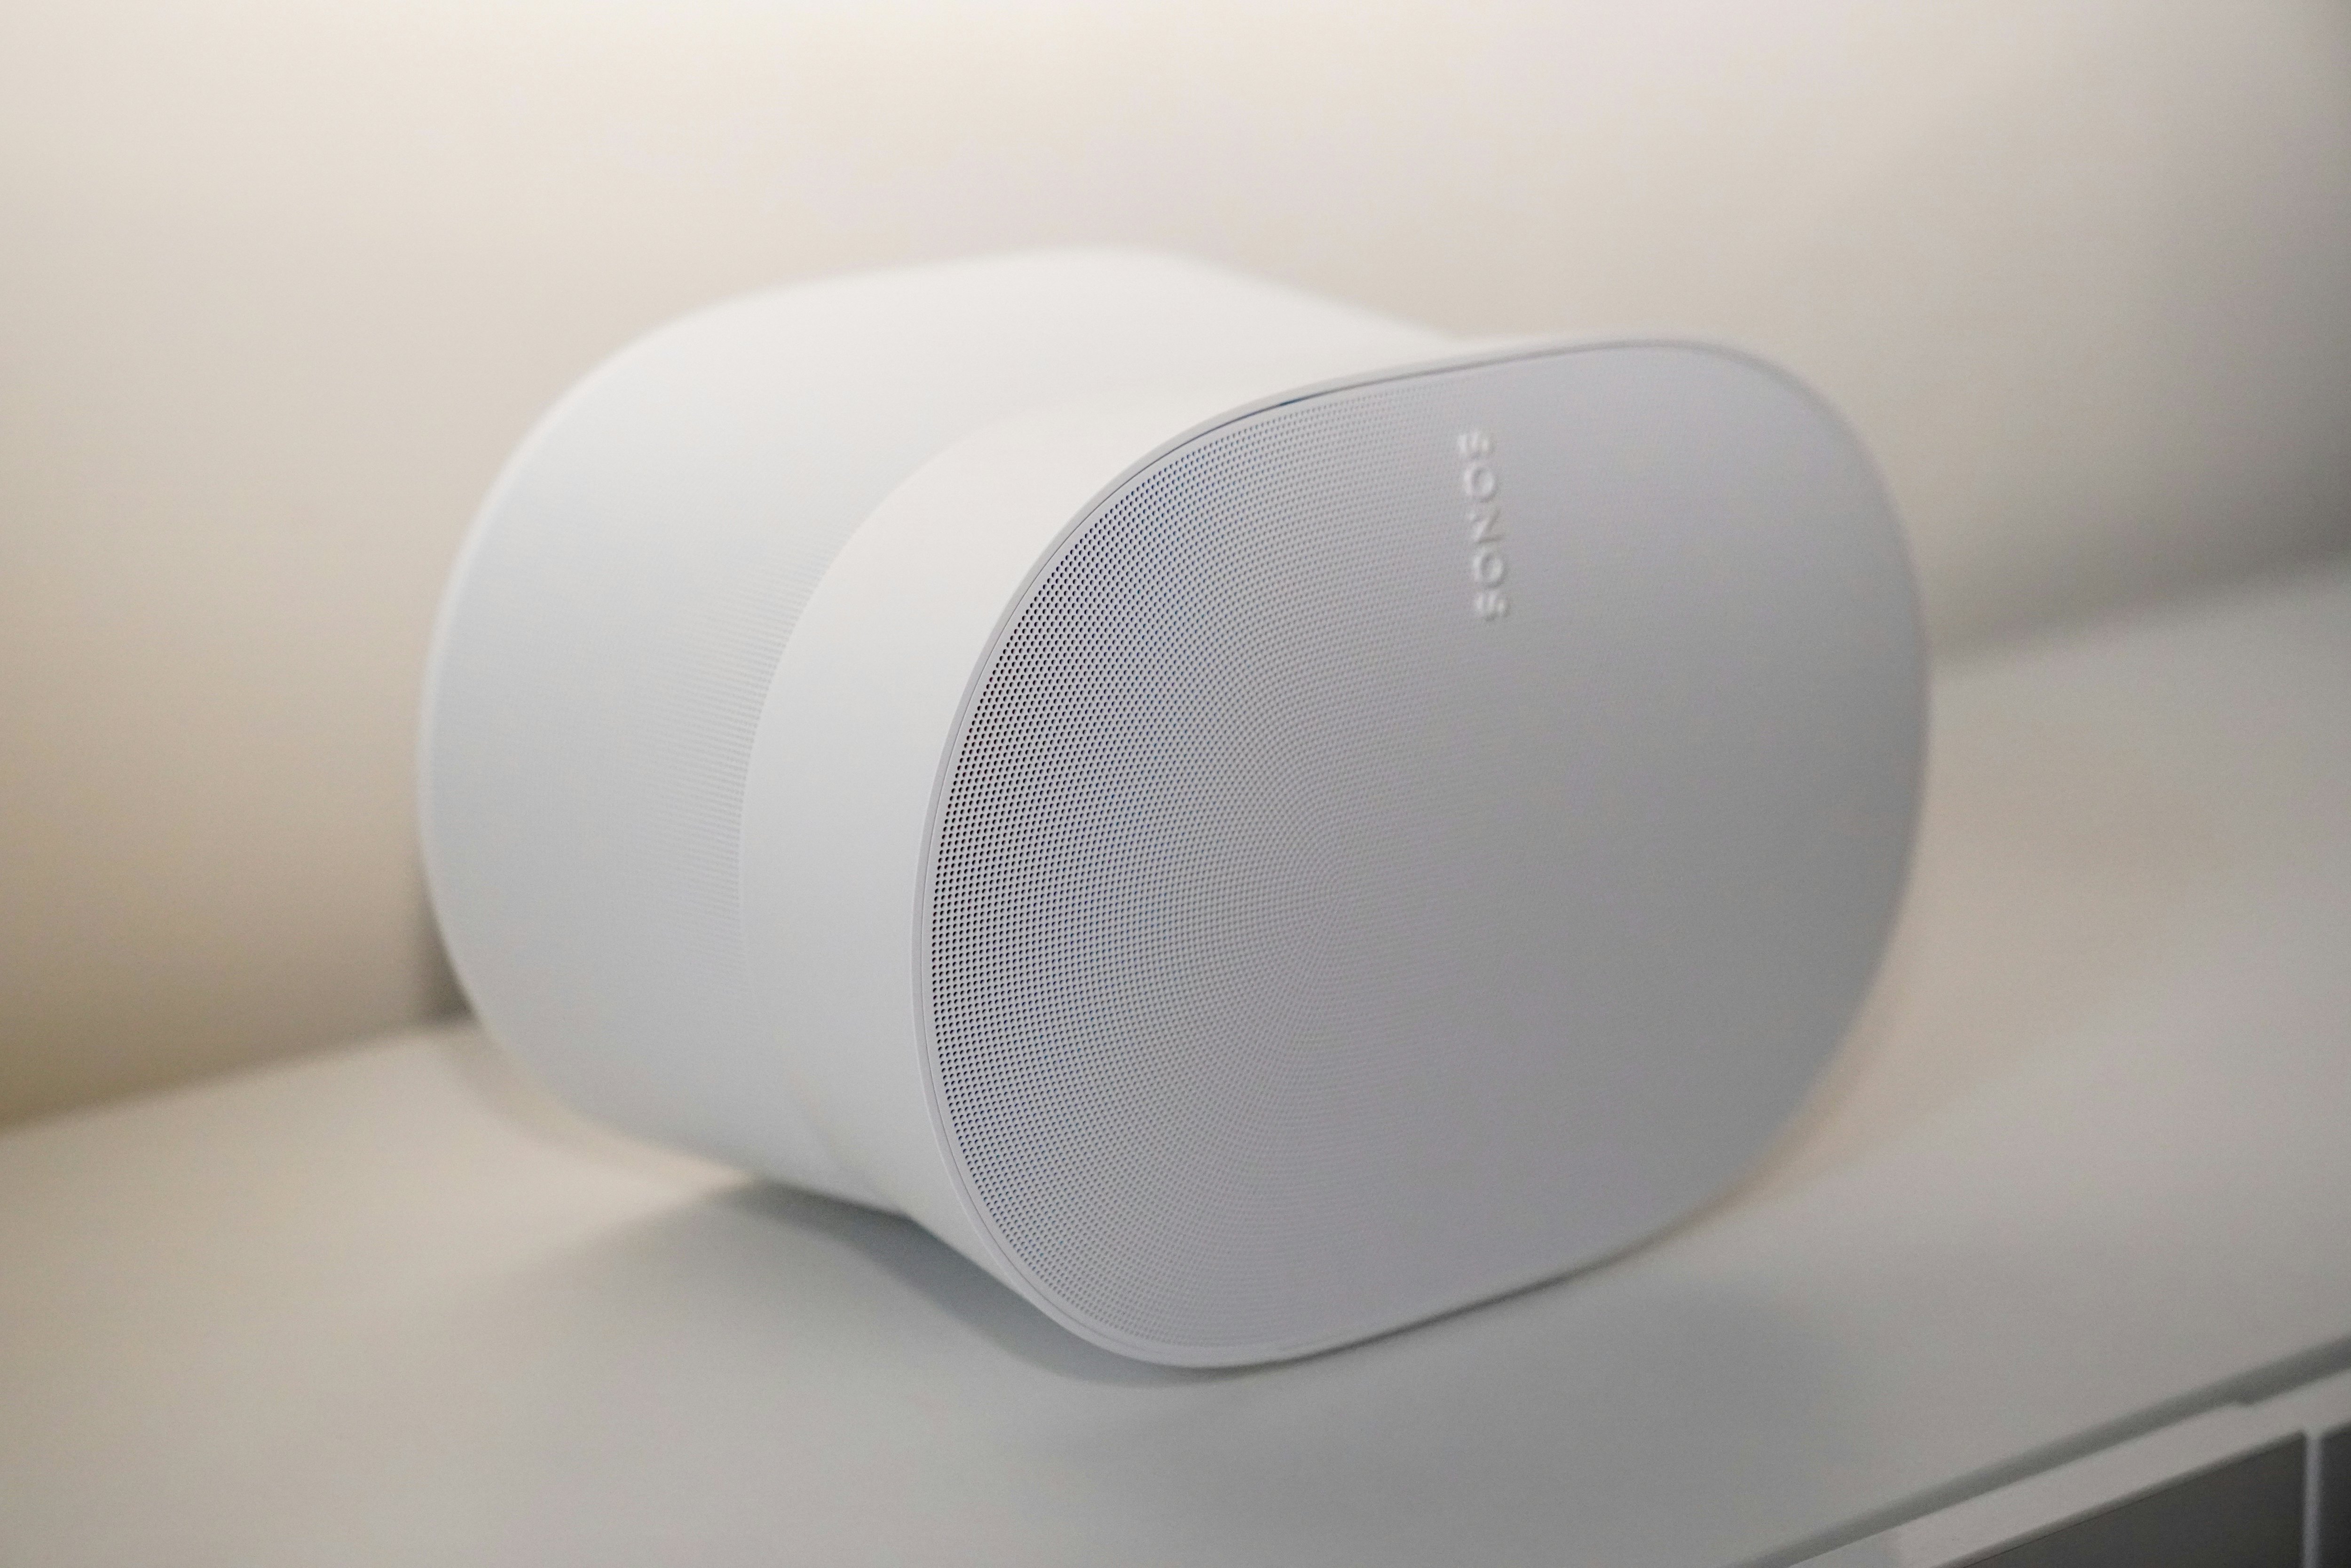 Sonos Era 300: An excellent speaker that's ahead of its time